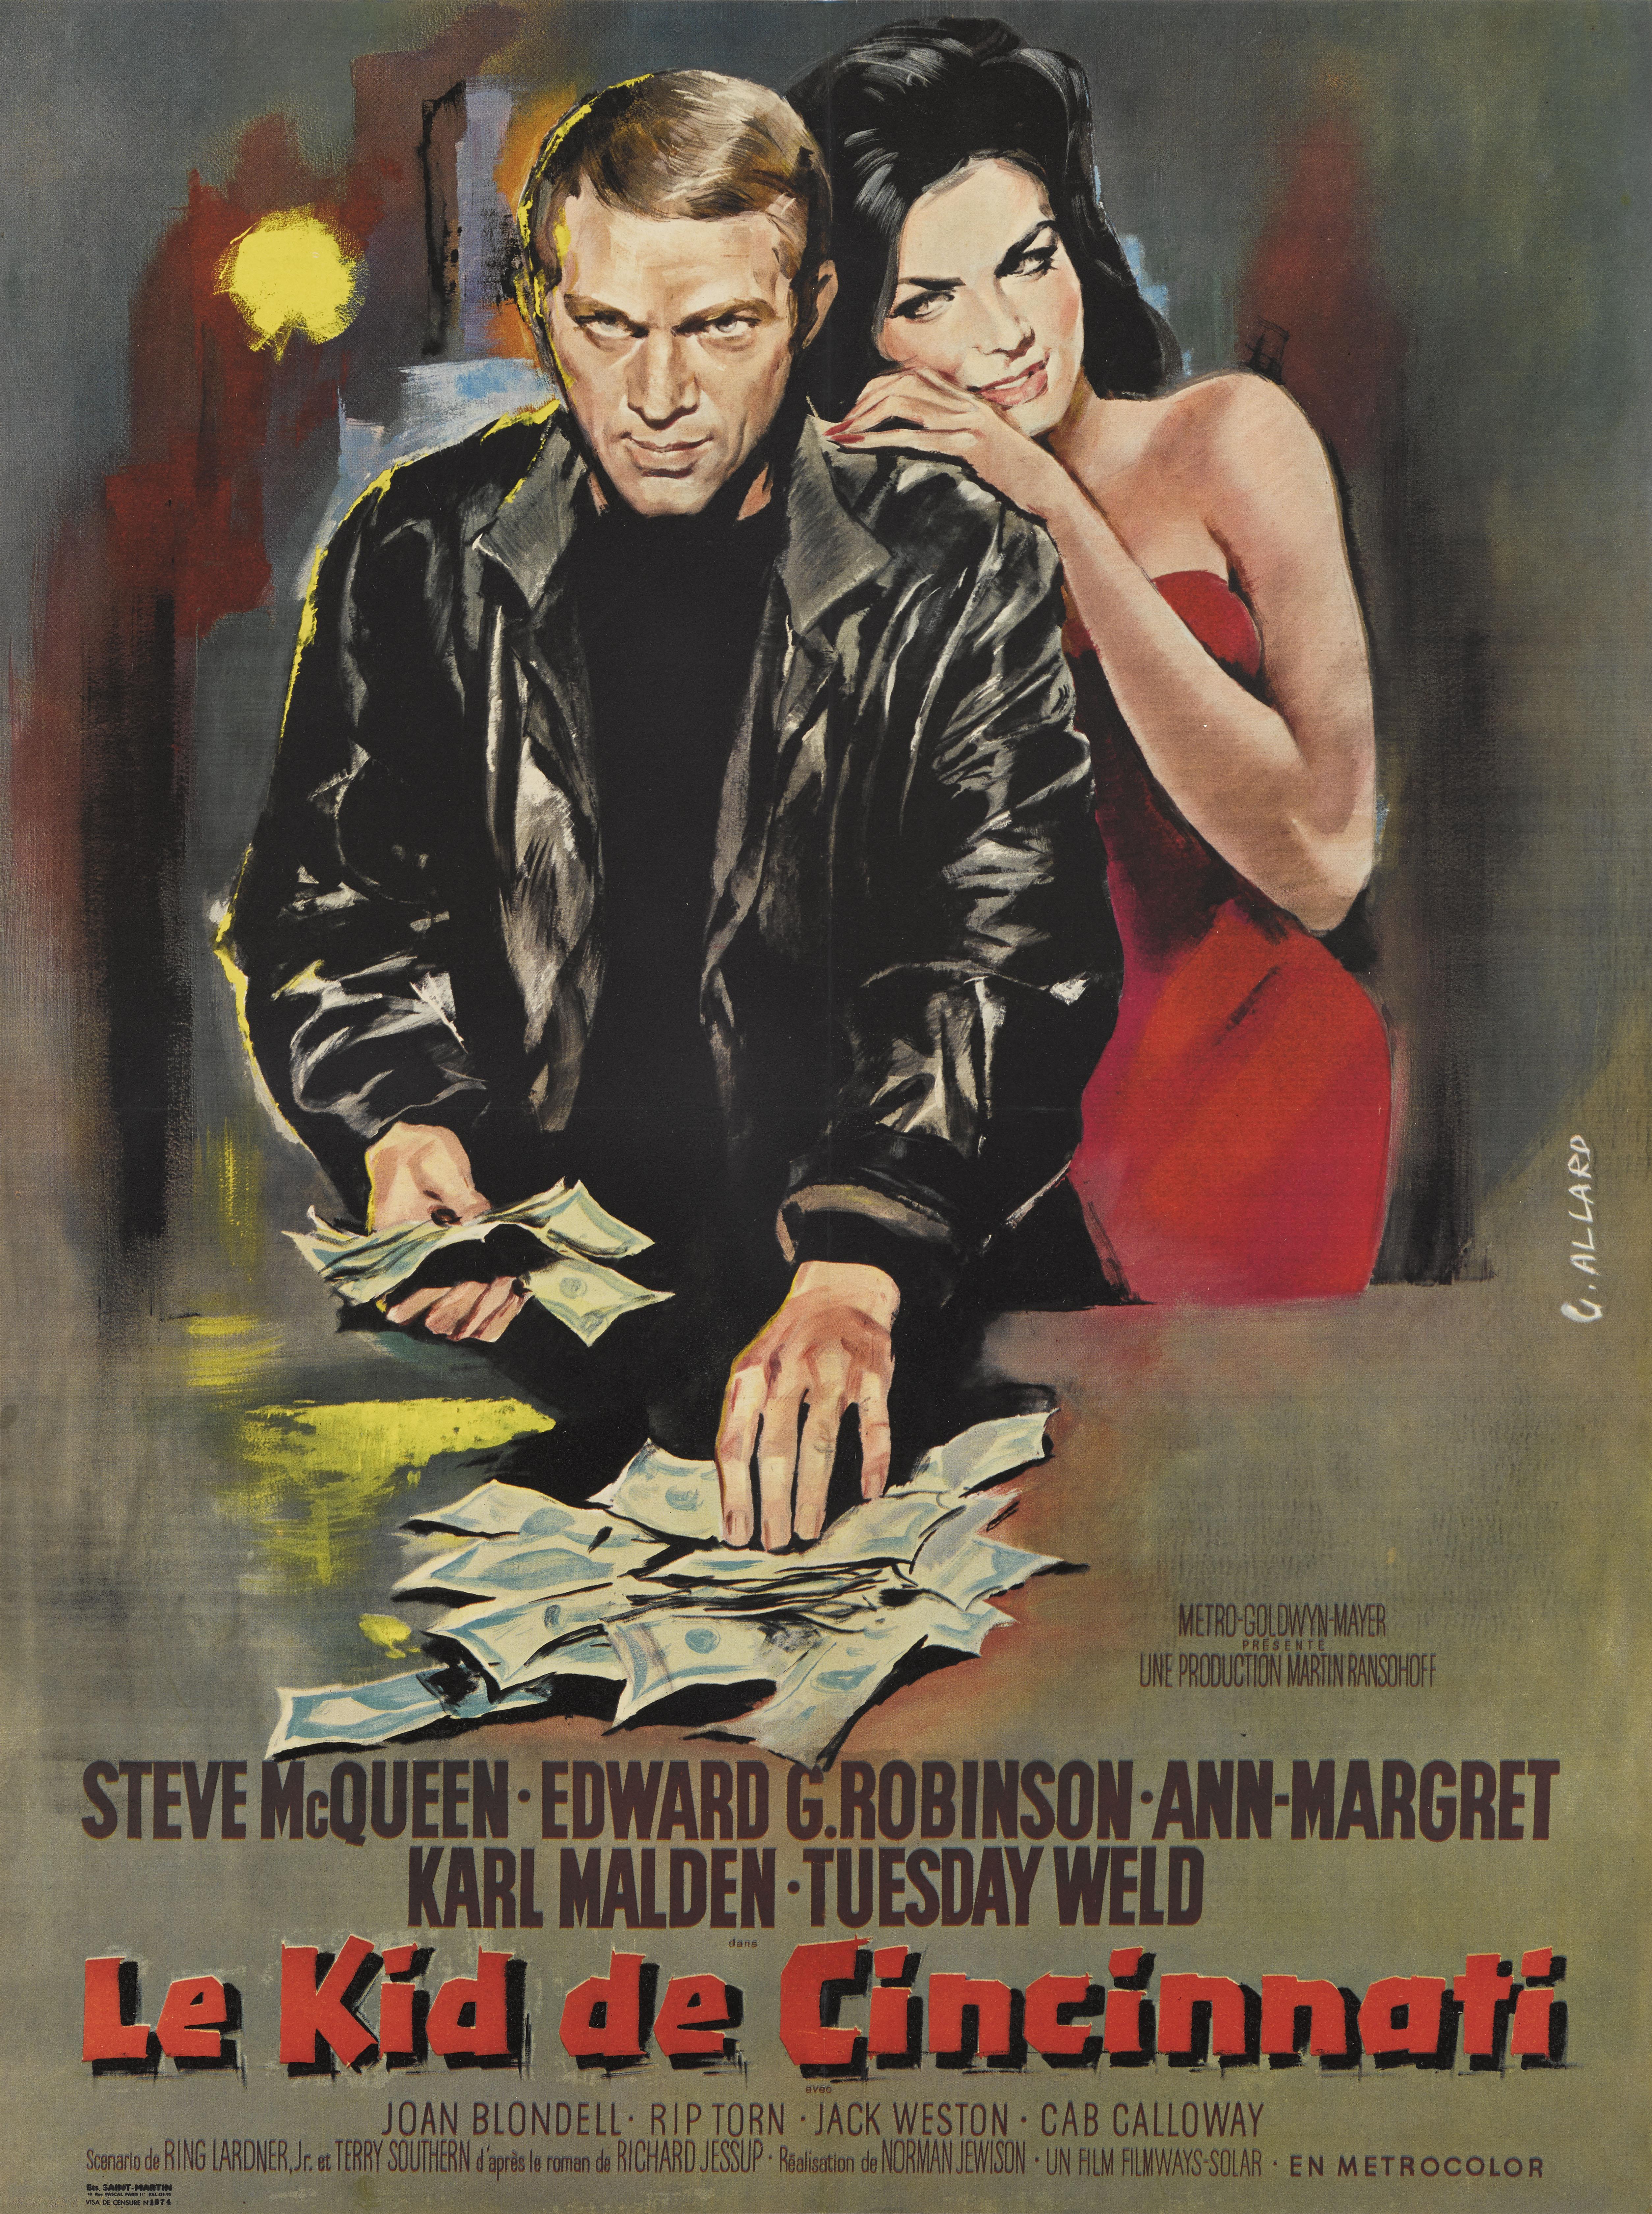 Original French film poster for The Cincinnati Kid 1965.
This American drama stars Steve McQueen as 'The Kid' and Edward G. Robinson as 'The Man', both poker players battling for the top spot. The film ends with an intense poker hand being played